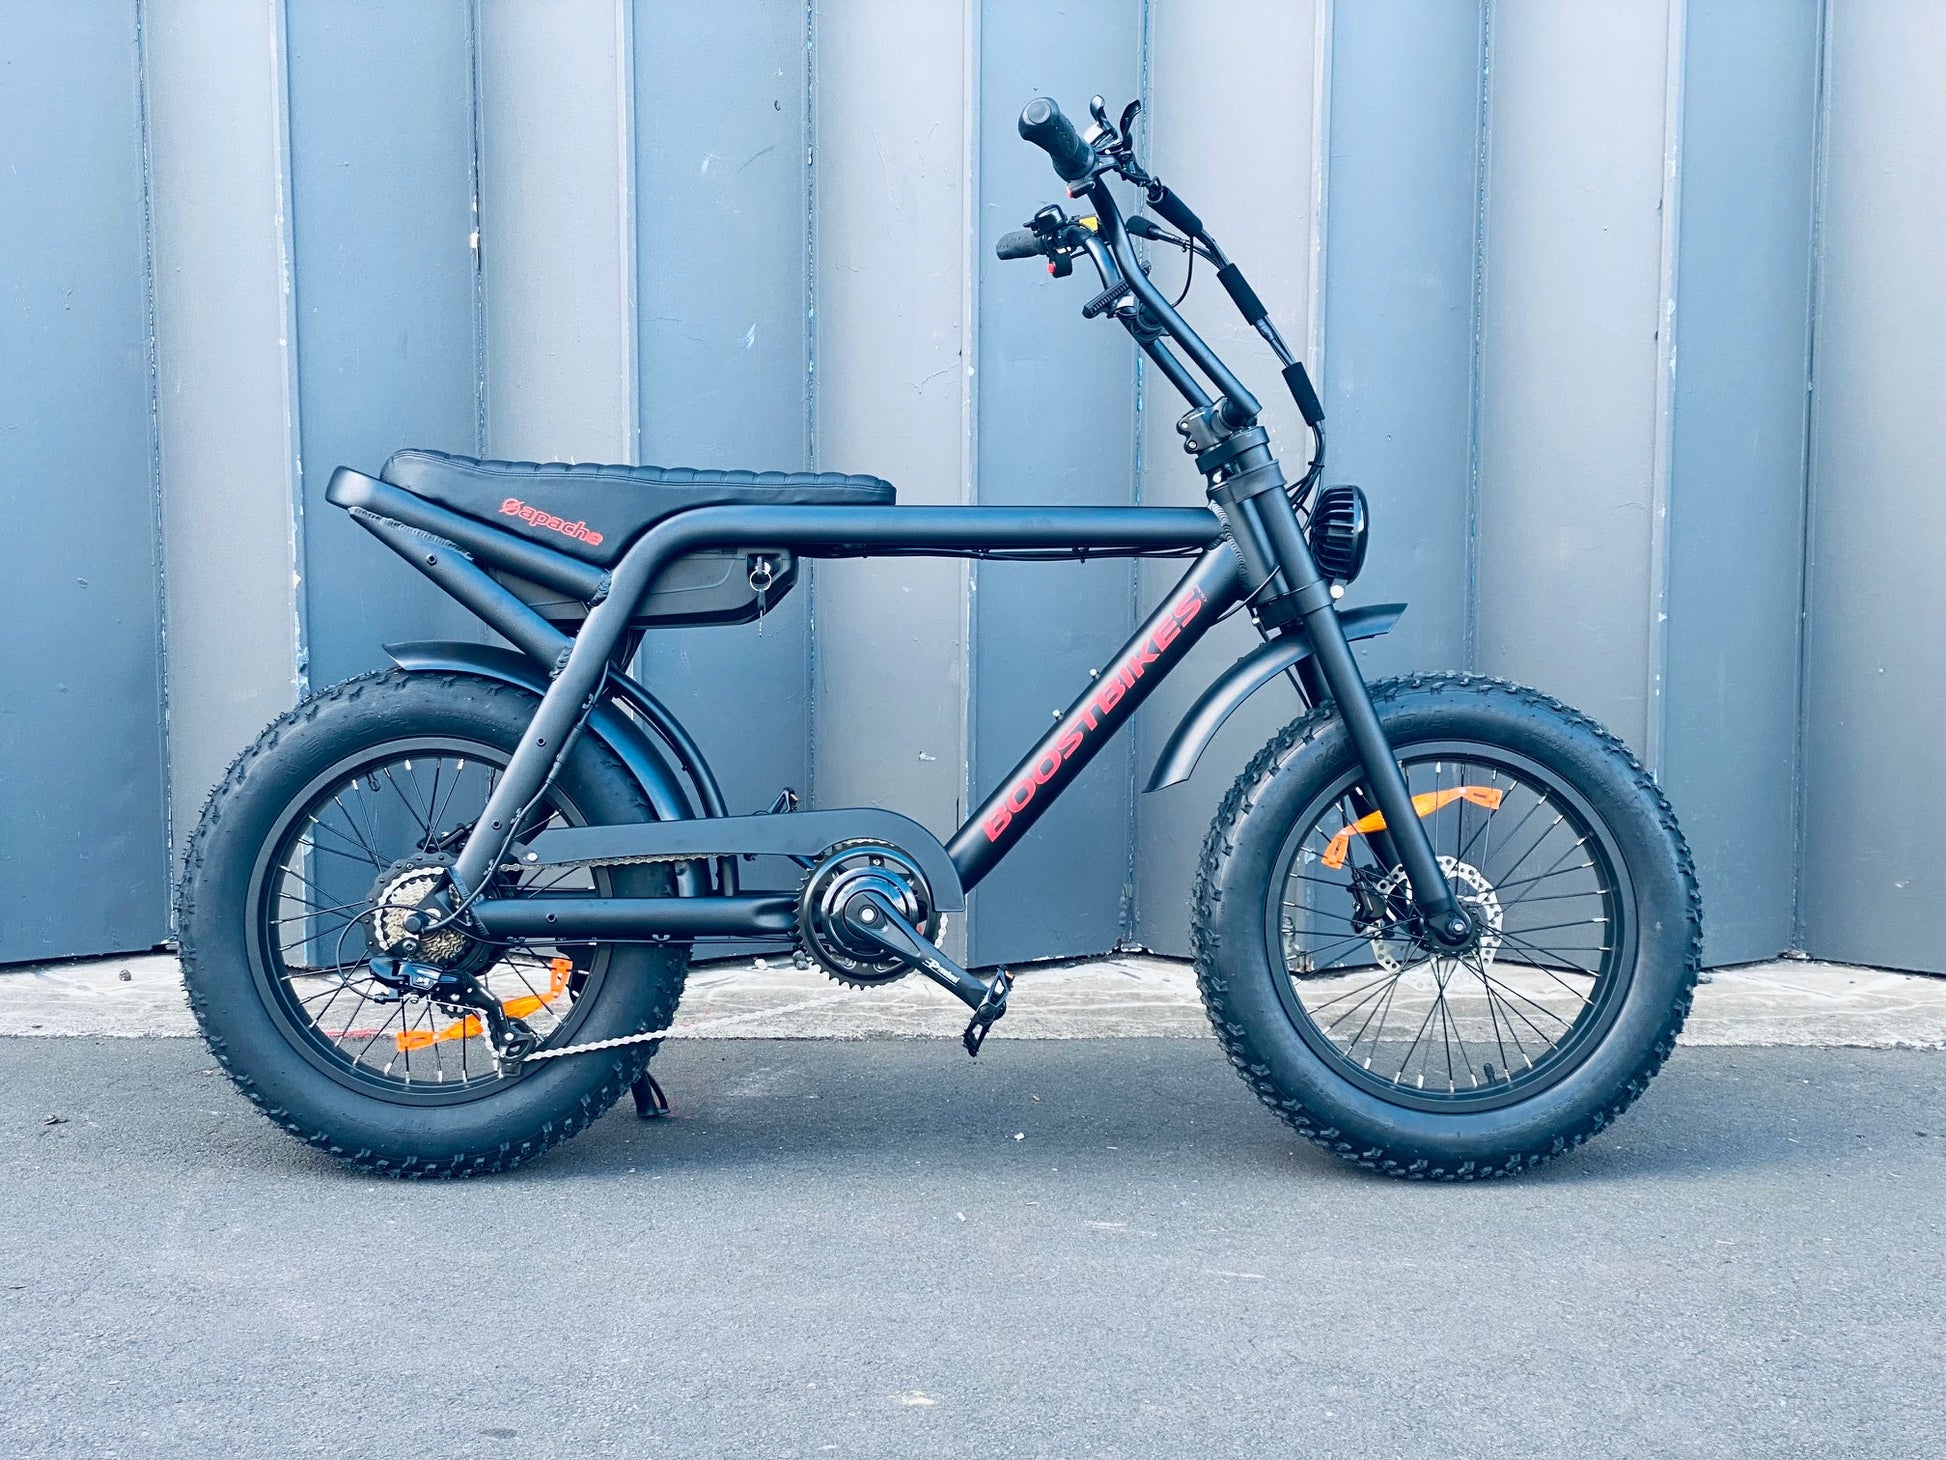 Apache Electric Bike, Modern yet retro 20" fat tyre ebike with performance and packed with features in true SUPER 73 style from Boostbikes.